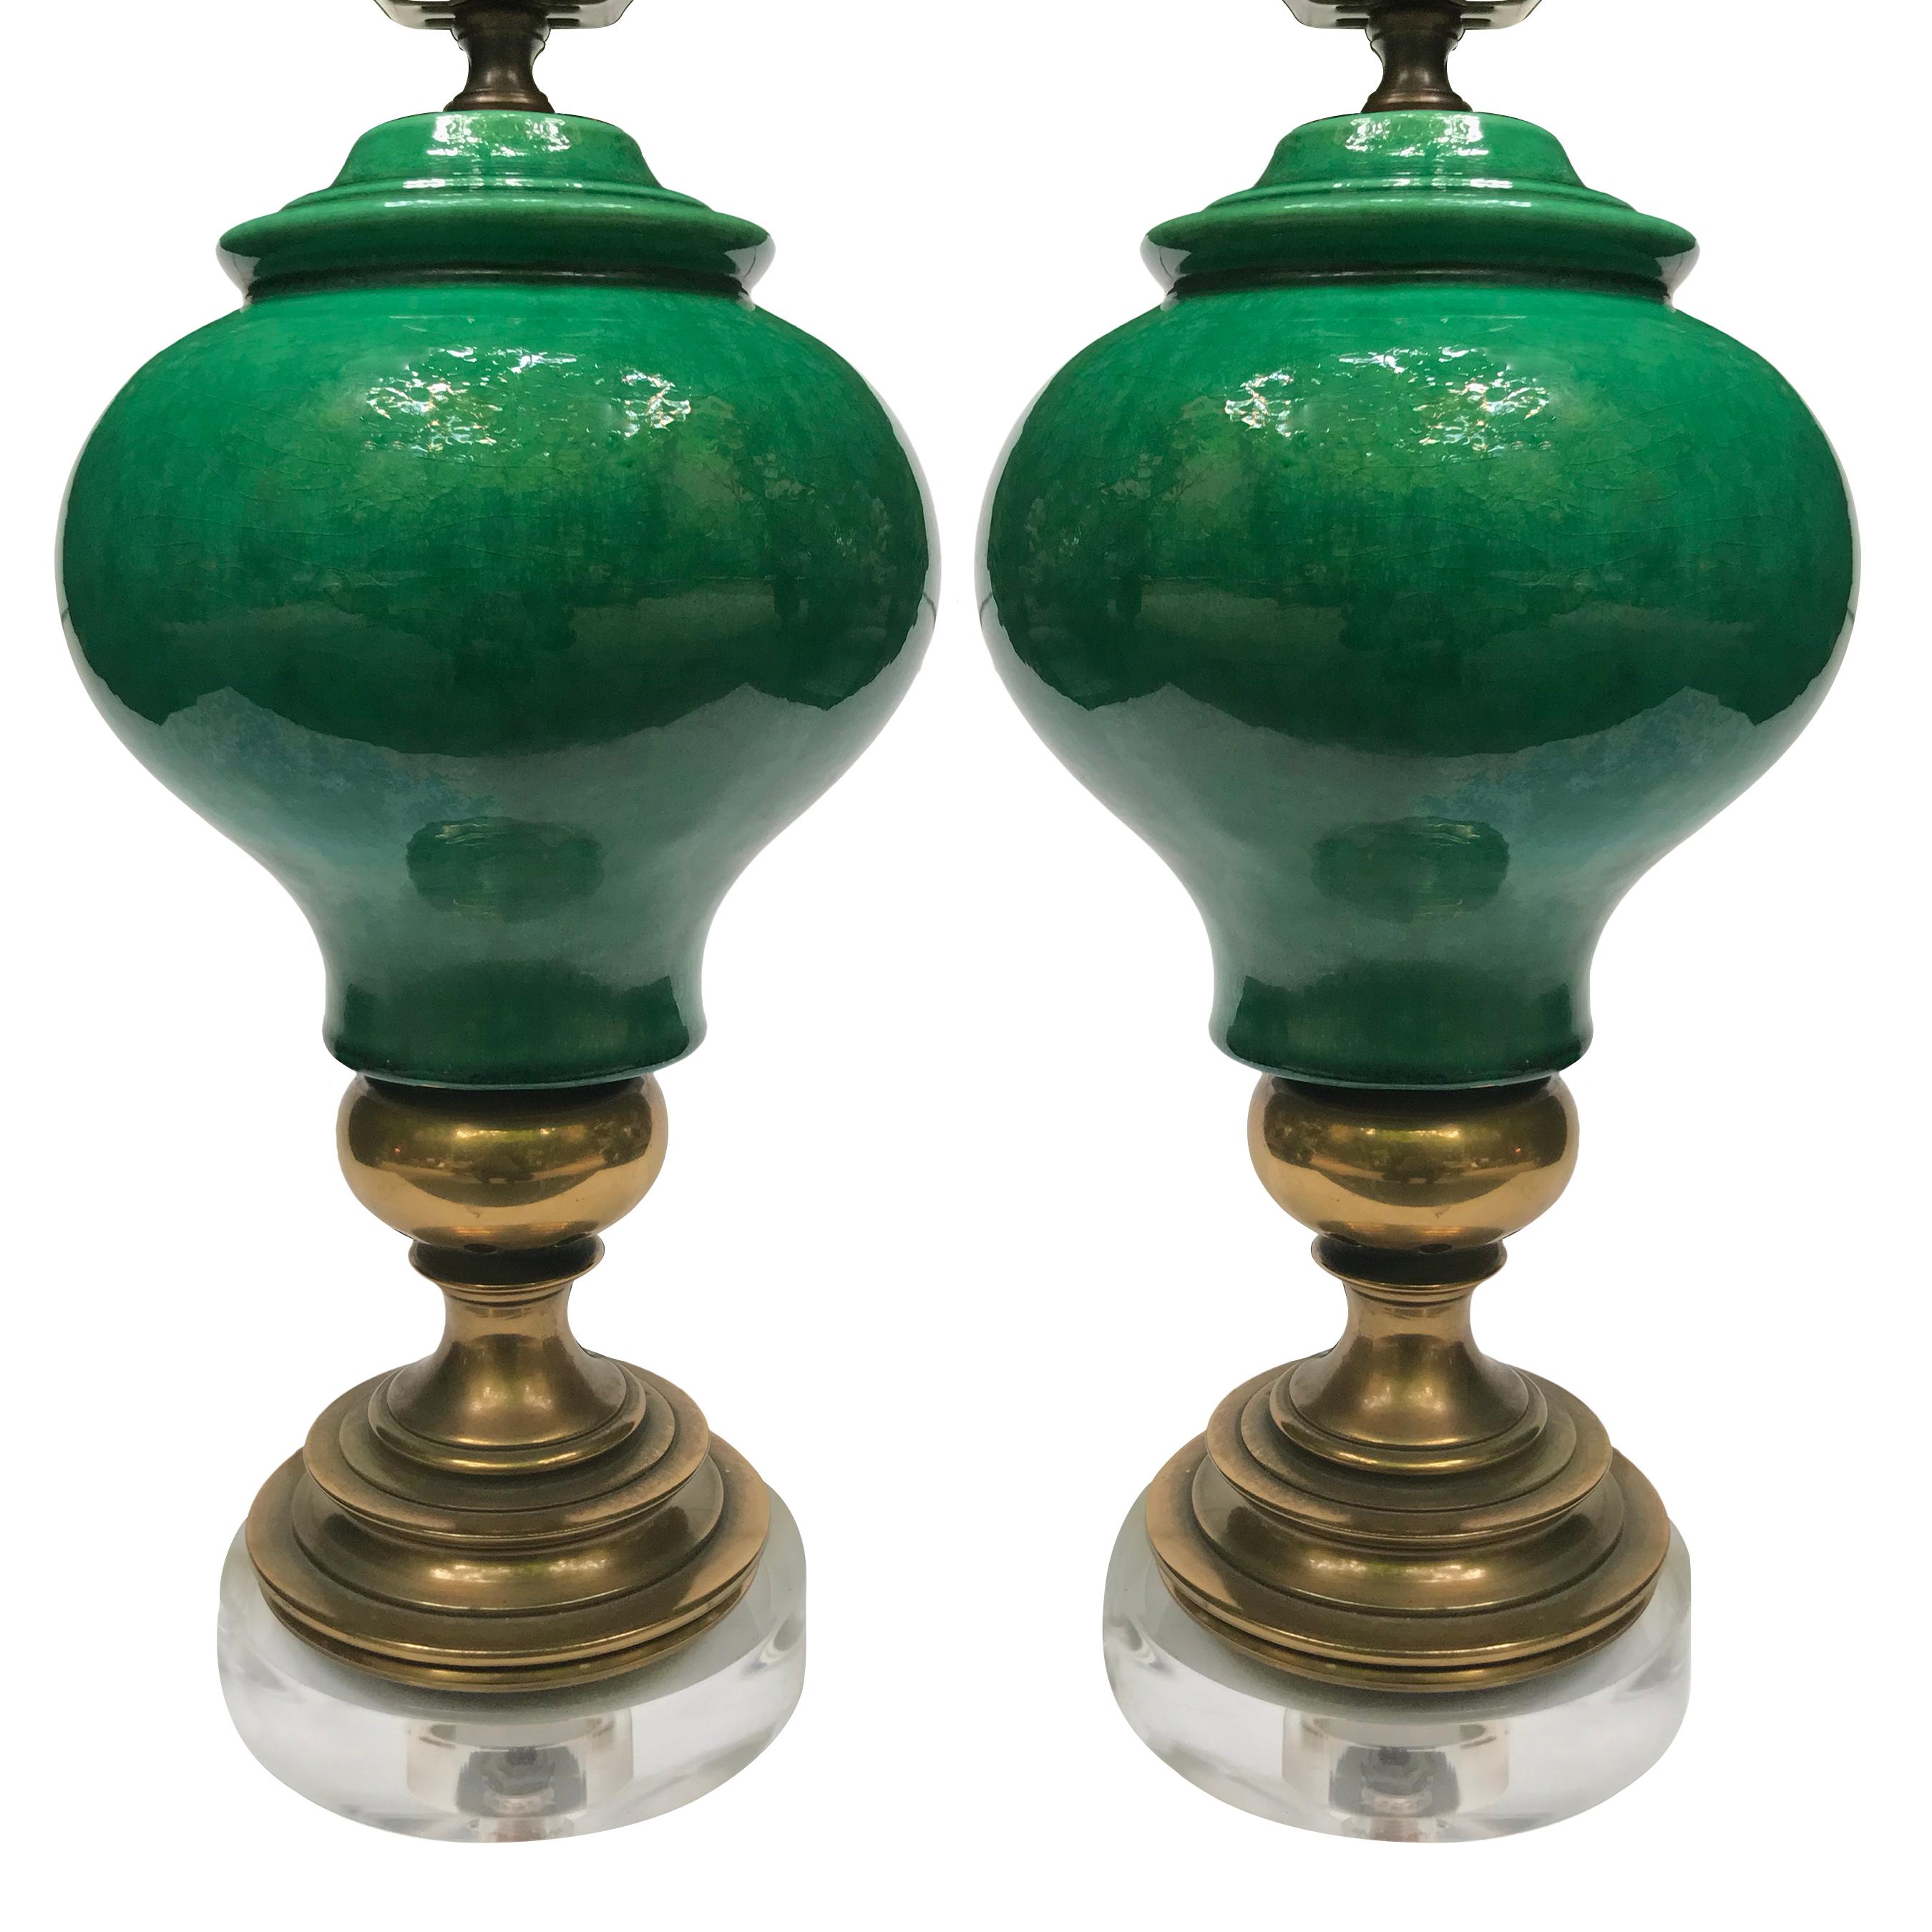 Pair of circa 1950's Italian ceramic table lamps with bronze fittings and lucite bases.

Measurements:
Height of body: 13.75